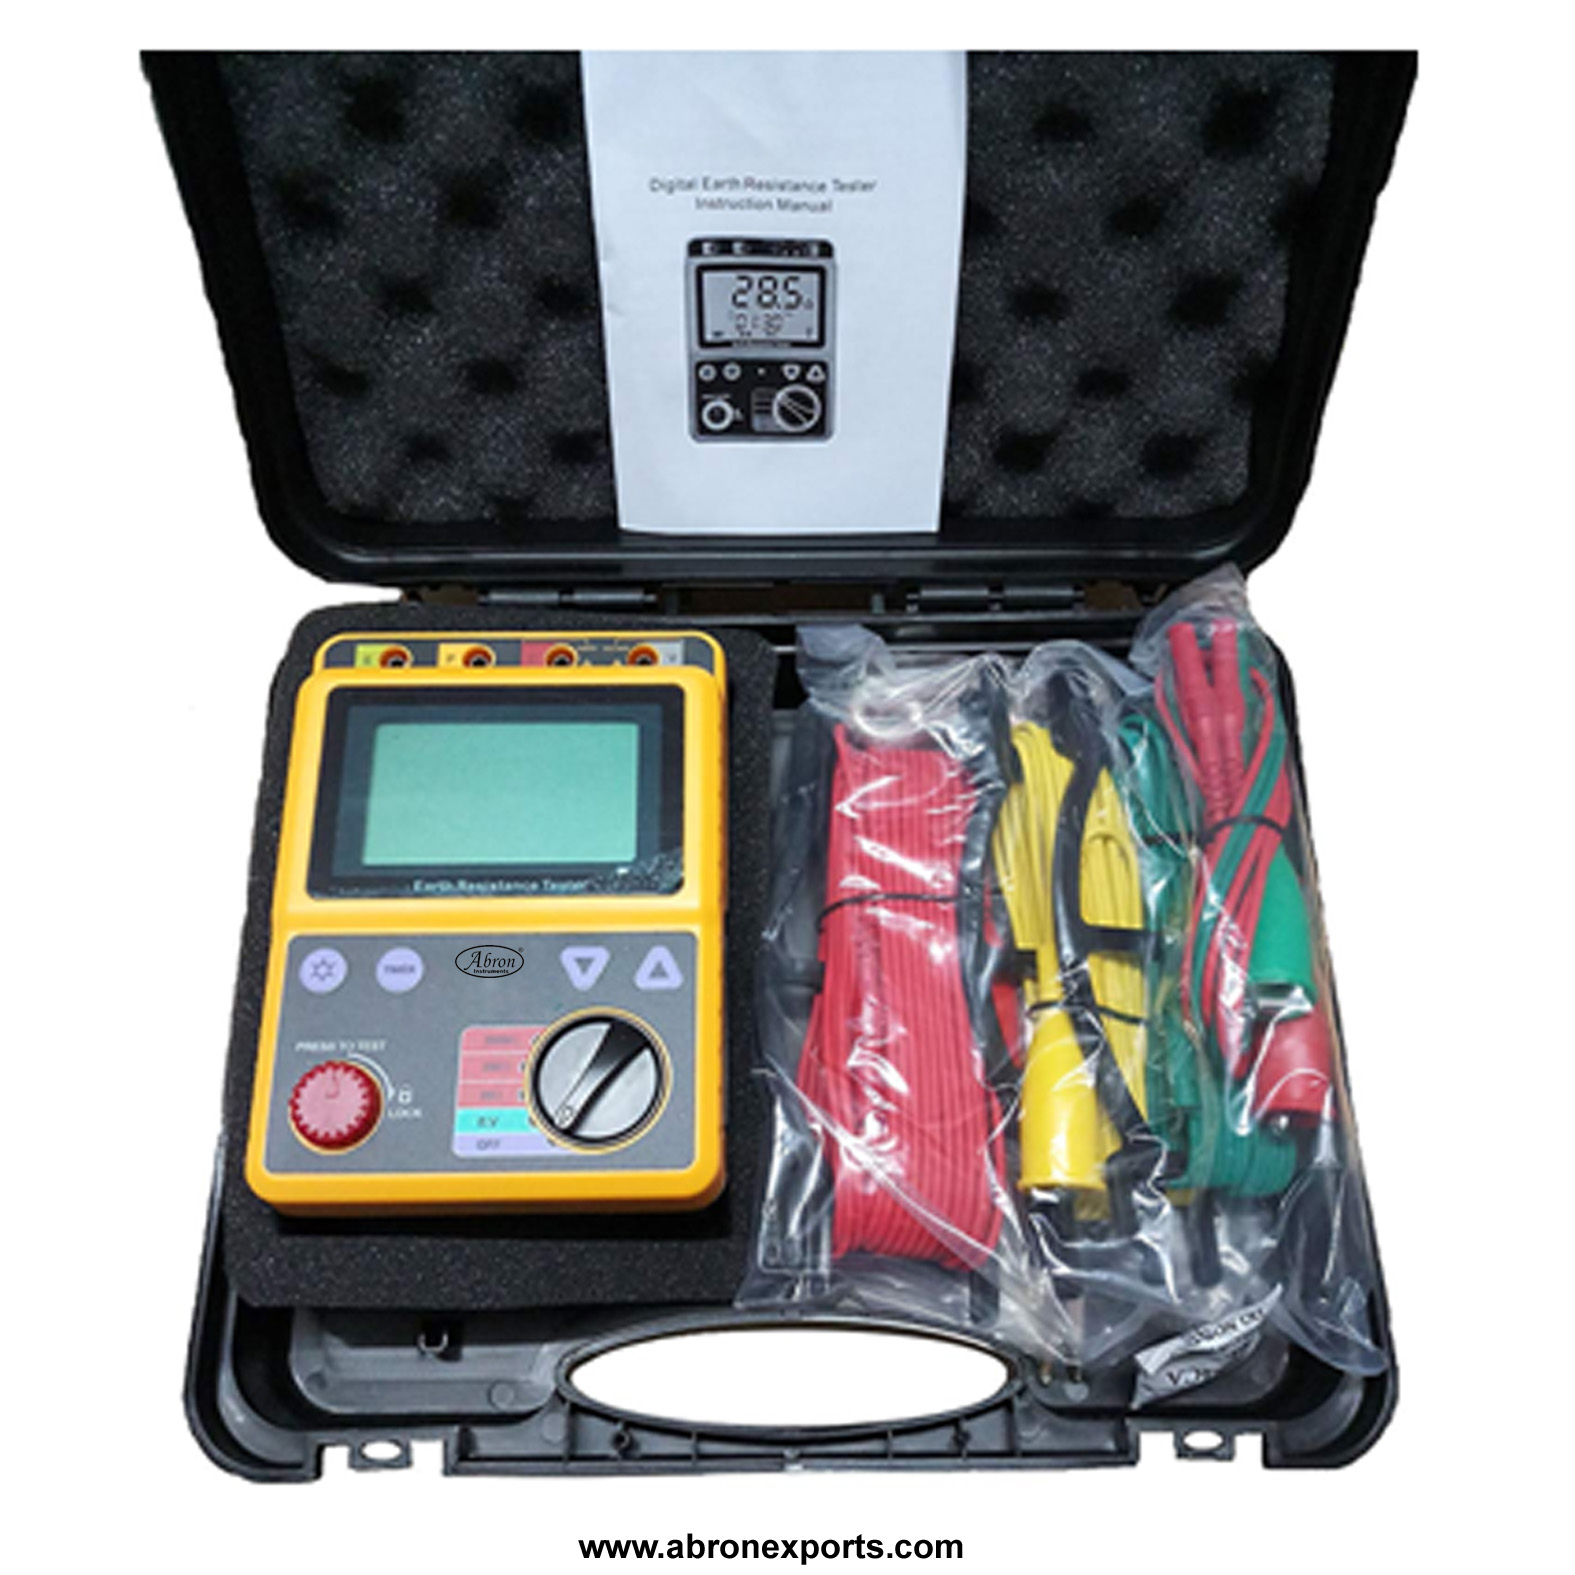 Earth Resistance tester Digital meter 0-10-1000v 0-5-500V 2000 Ohms kit rechargeable wire 4 spikes steel hammer plier screw carrying bag abron AE-1256D2